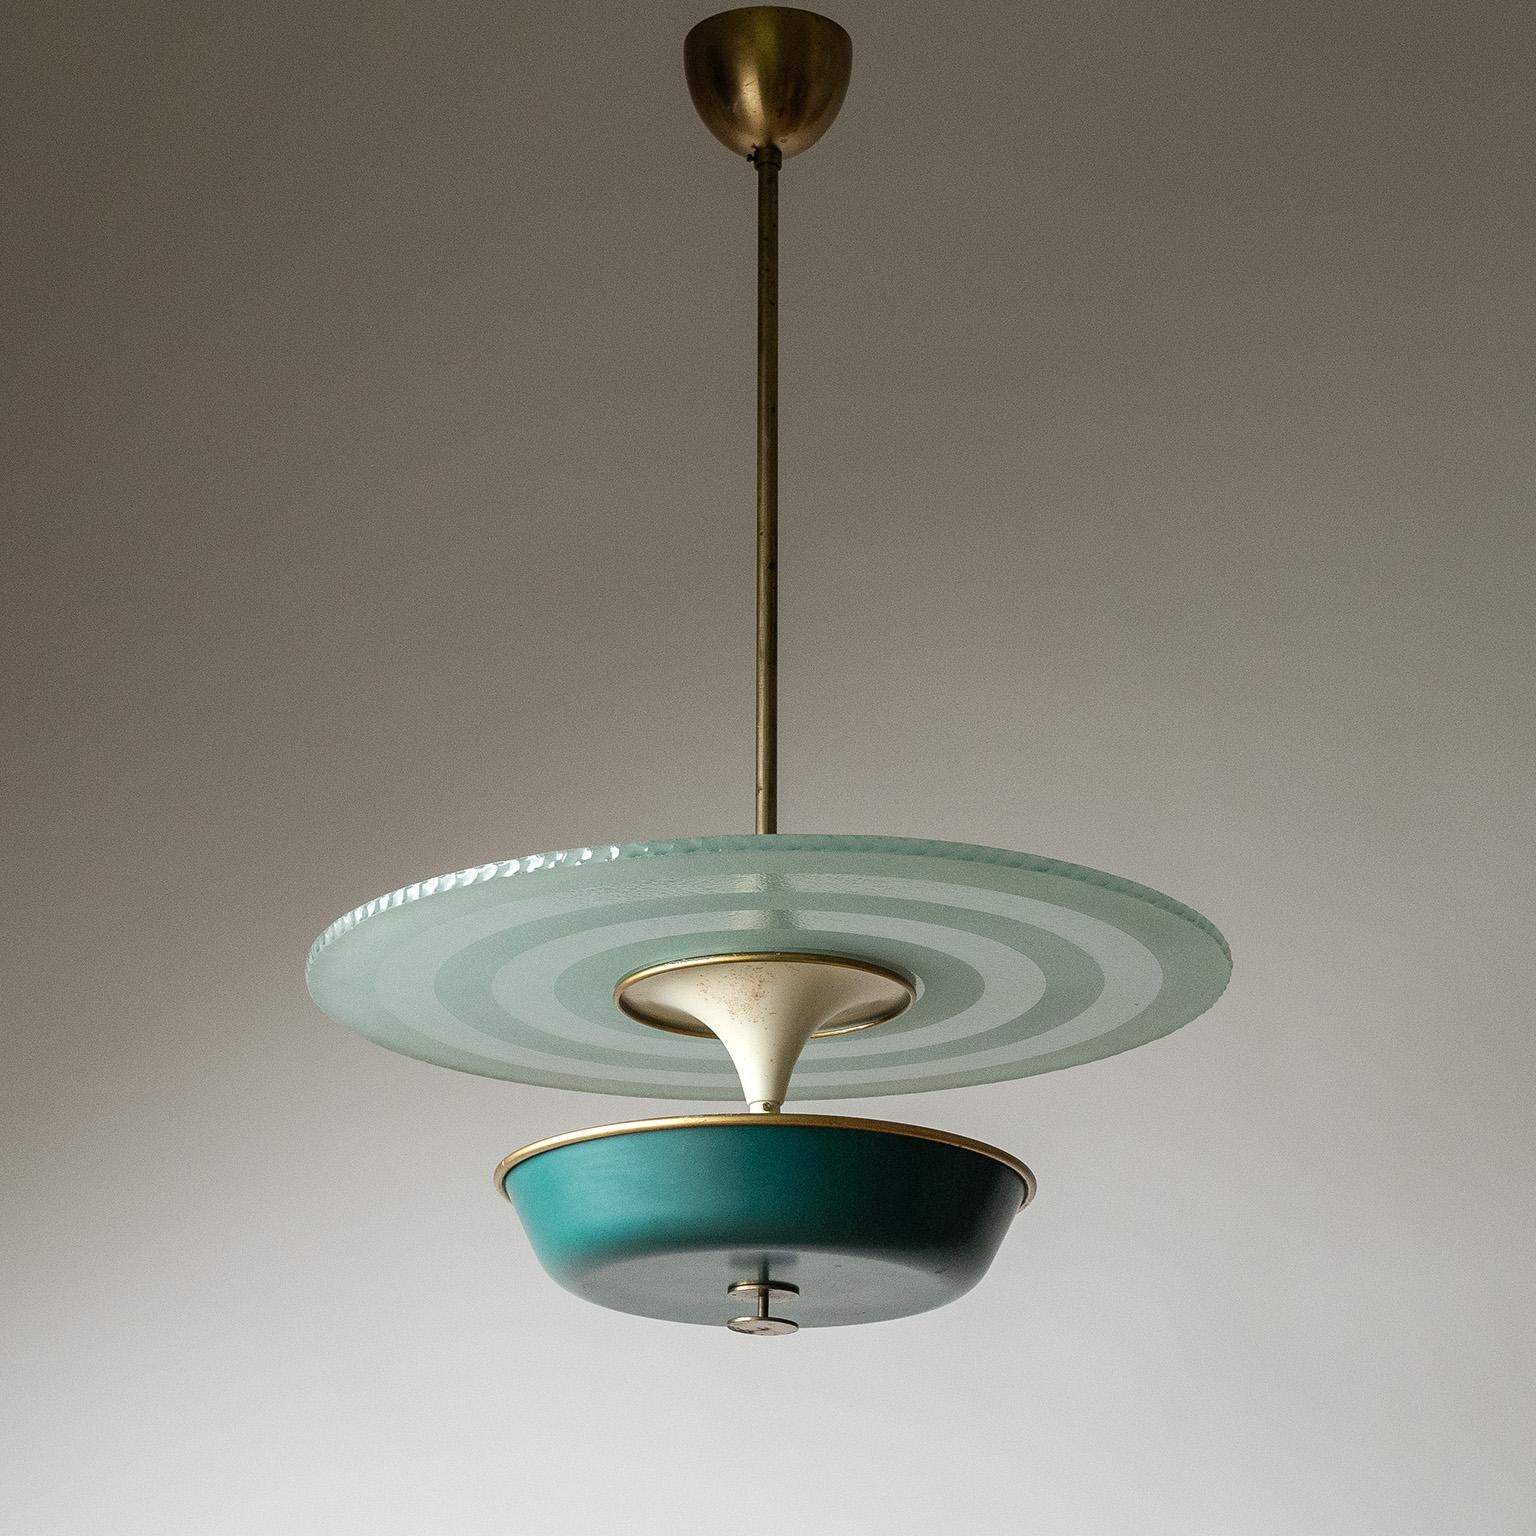 Graphical Swedish Art Deco pendant from the 1930s, possibly by Böhlmarks. A forrest-green lacquered shade and a large „raw glass“ disc-diffuser with a chipped edge and frosted concentric circles. The position of the glass can be altered along the